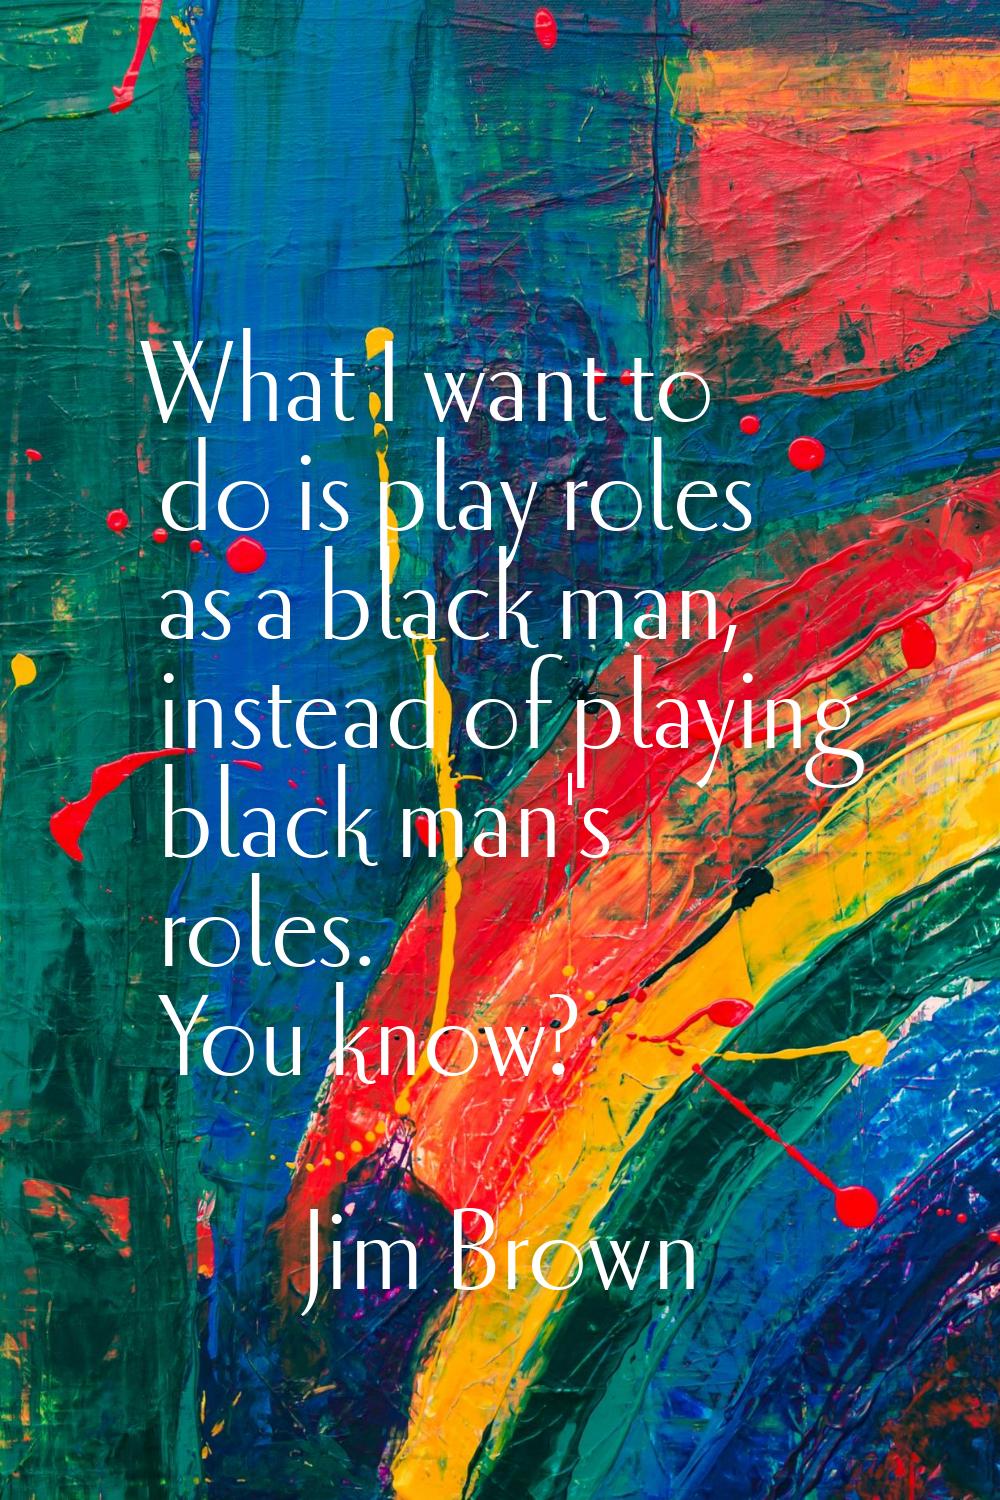 What I want to do is play roles as a black man, instead of playing black man's roles. You know?